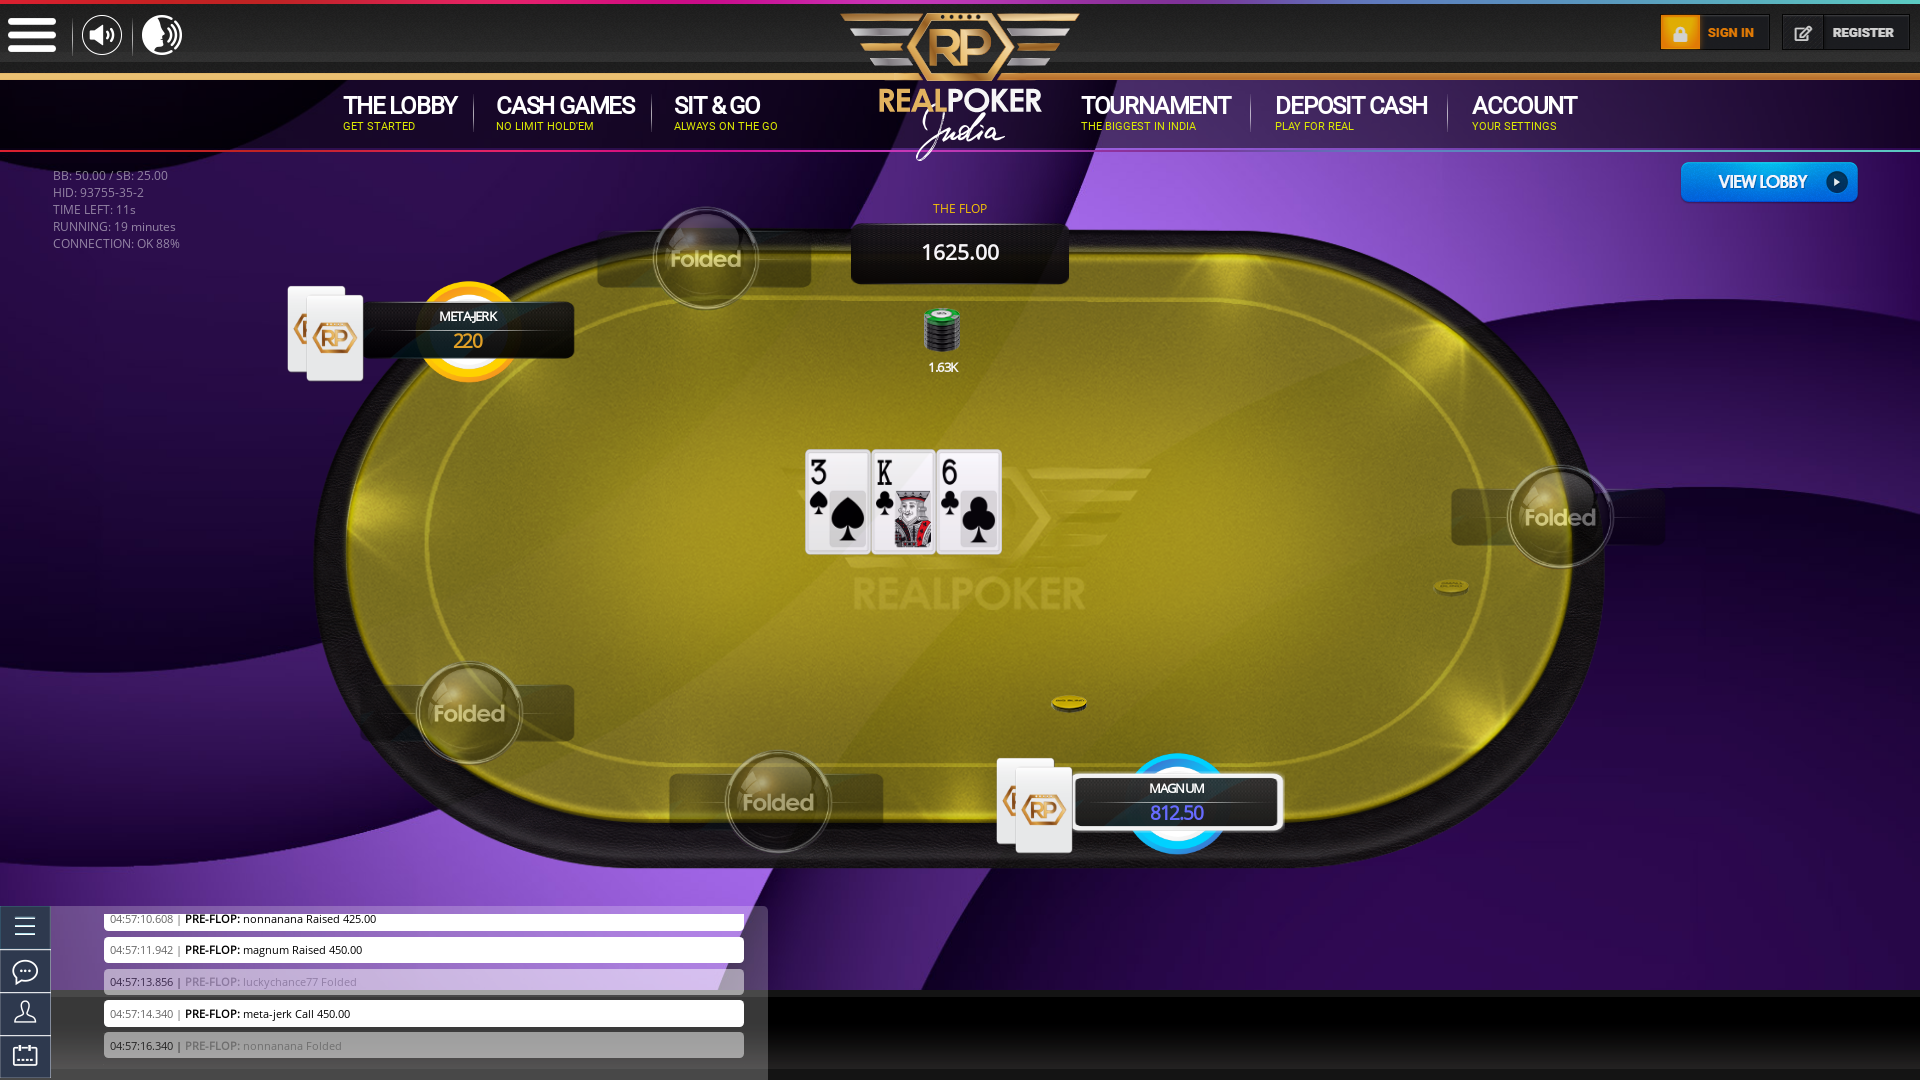 Indian poker on a 10 player table in the 18th minute